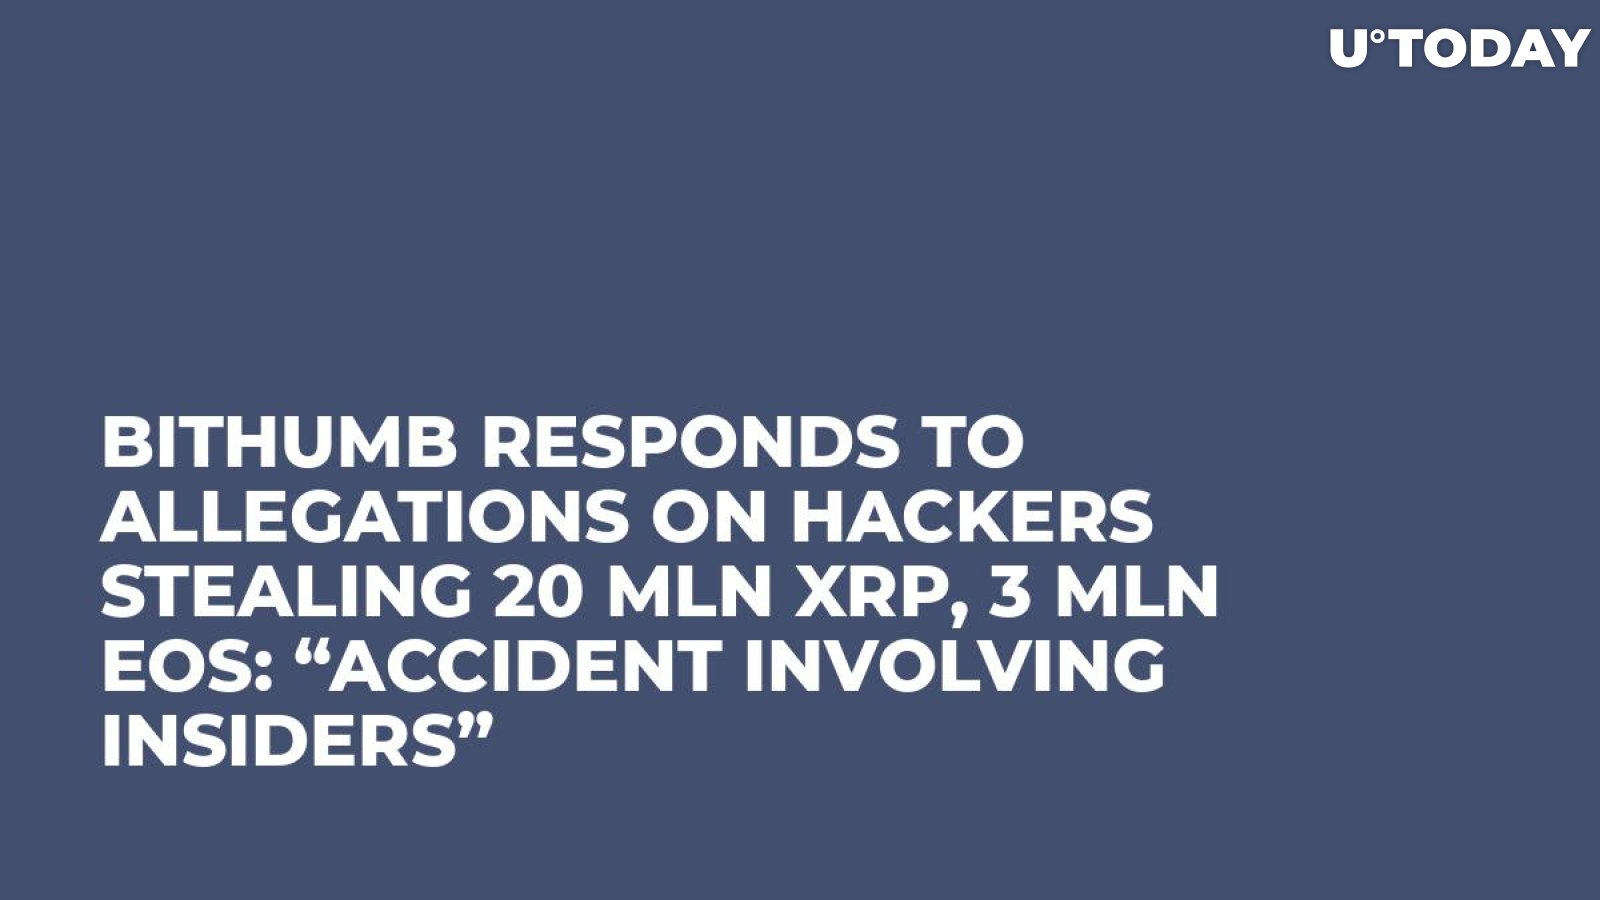 Bithumb Responds to Allegations On Hackers Stealing 20 Mln XRP, 3 Mln EOS: “Accident Involving Insiders”